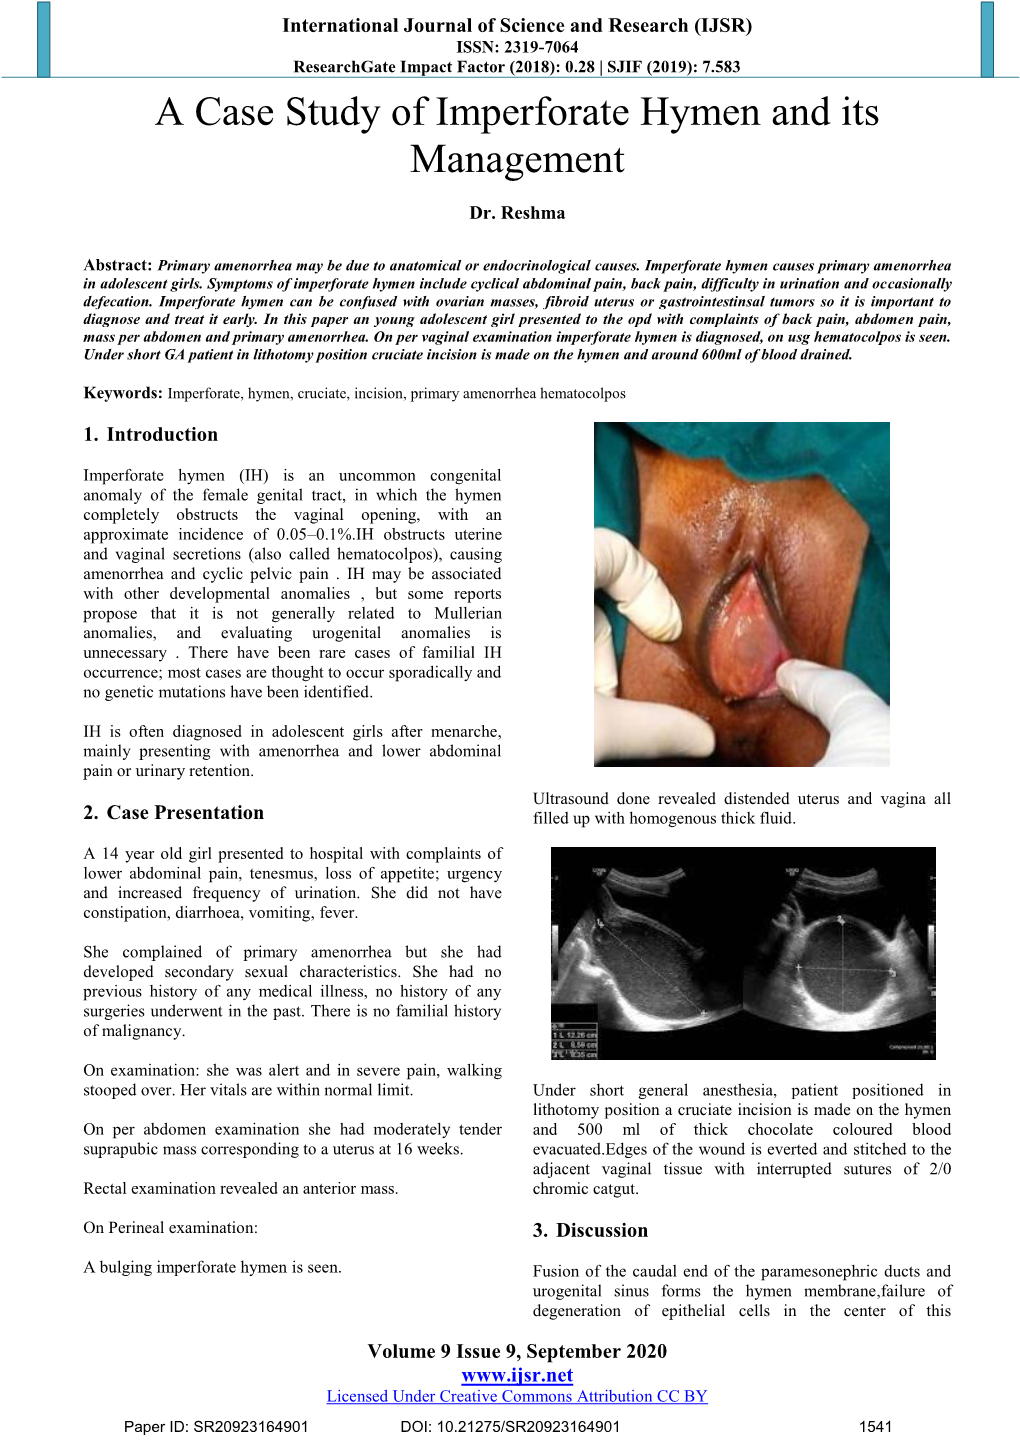 A Case Study of Imperforate Hymen and Its Management